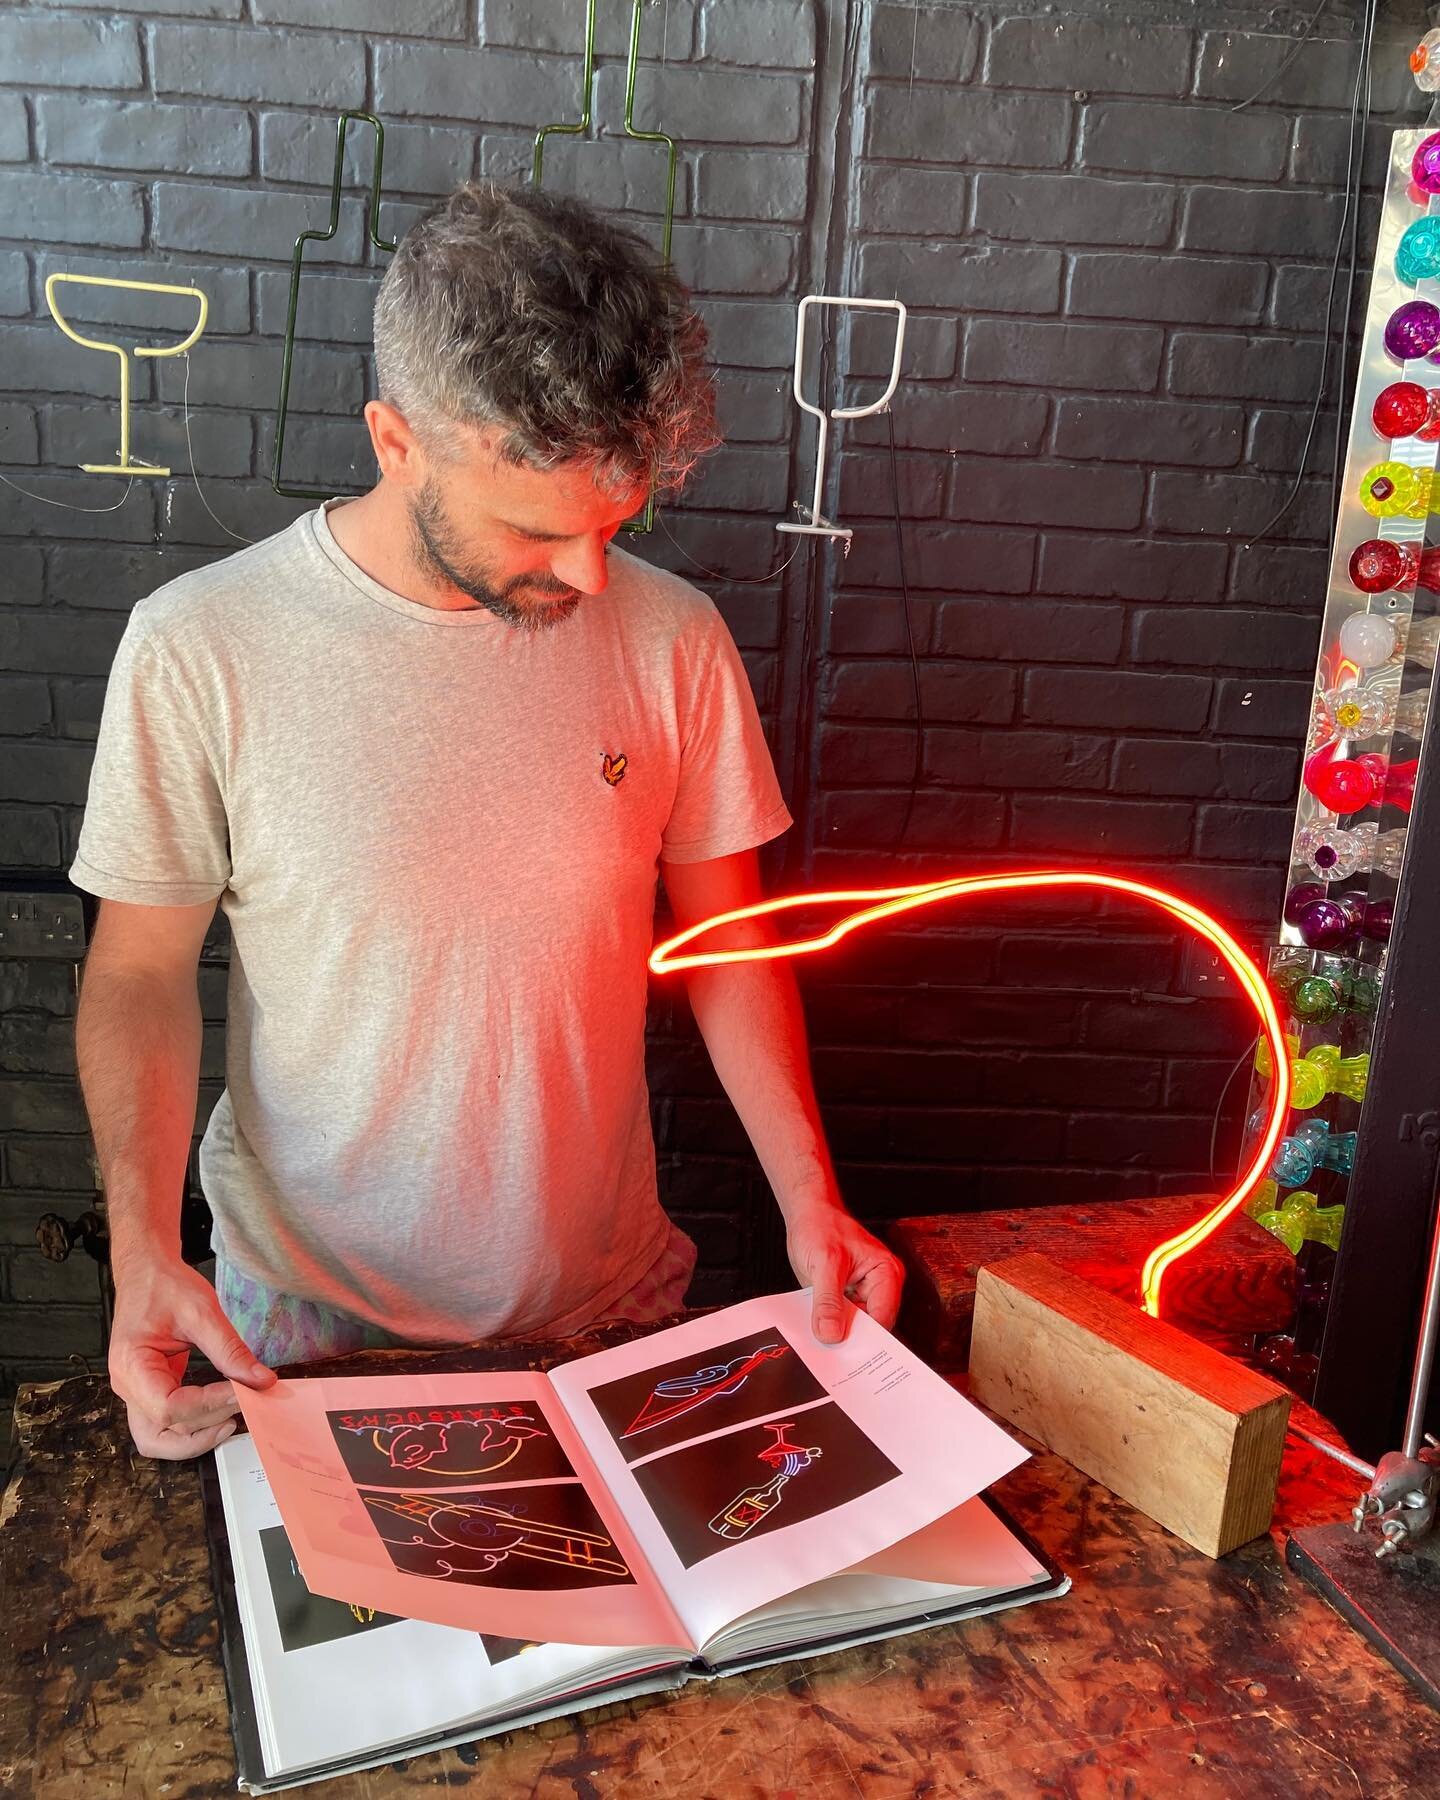 Rinus Rinakles with his incredible (and functional) neon lamp 💡

We love seeing your ideas come to life at neon school &hellip; this was a particularly fun one 

What do you want to make in neon ?? 

#neonschool